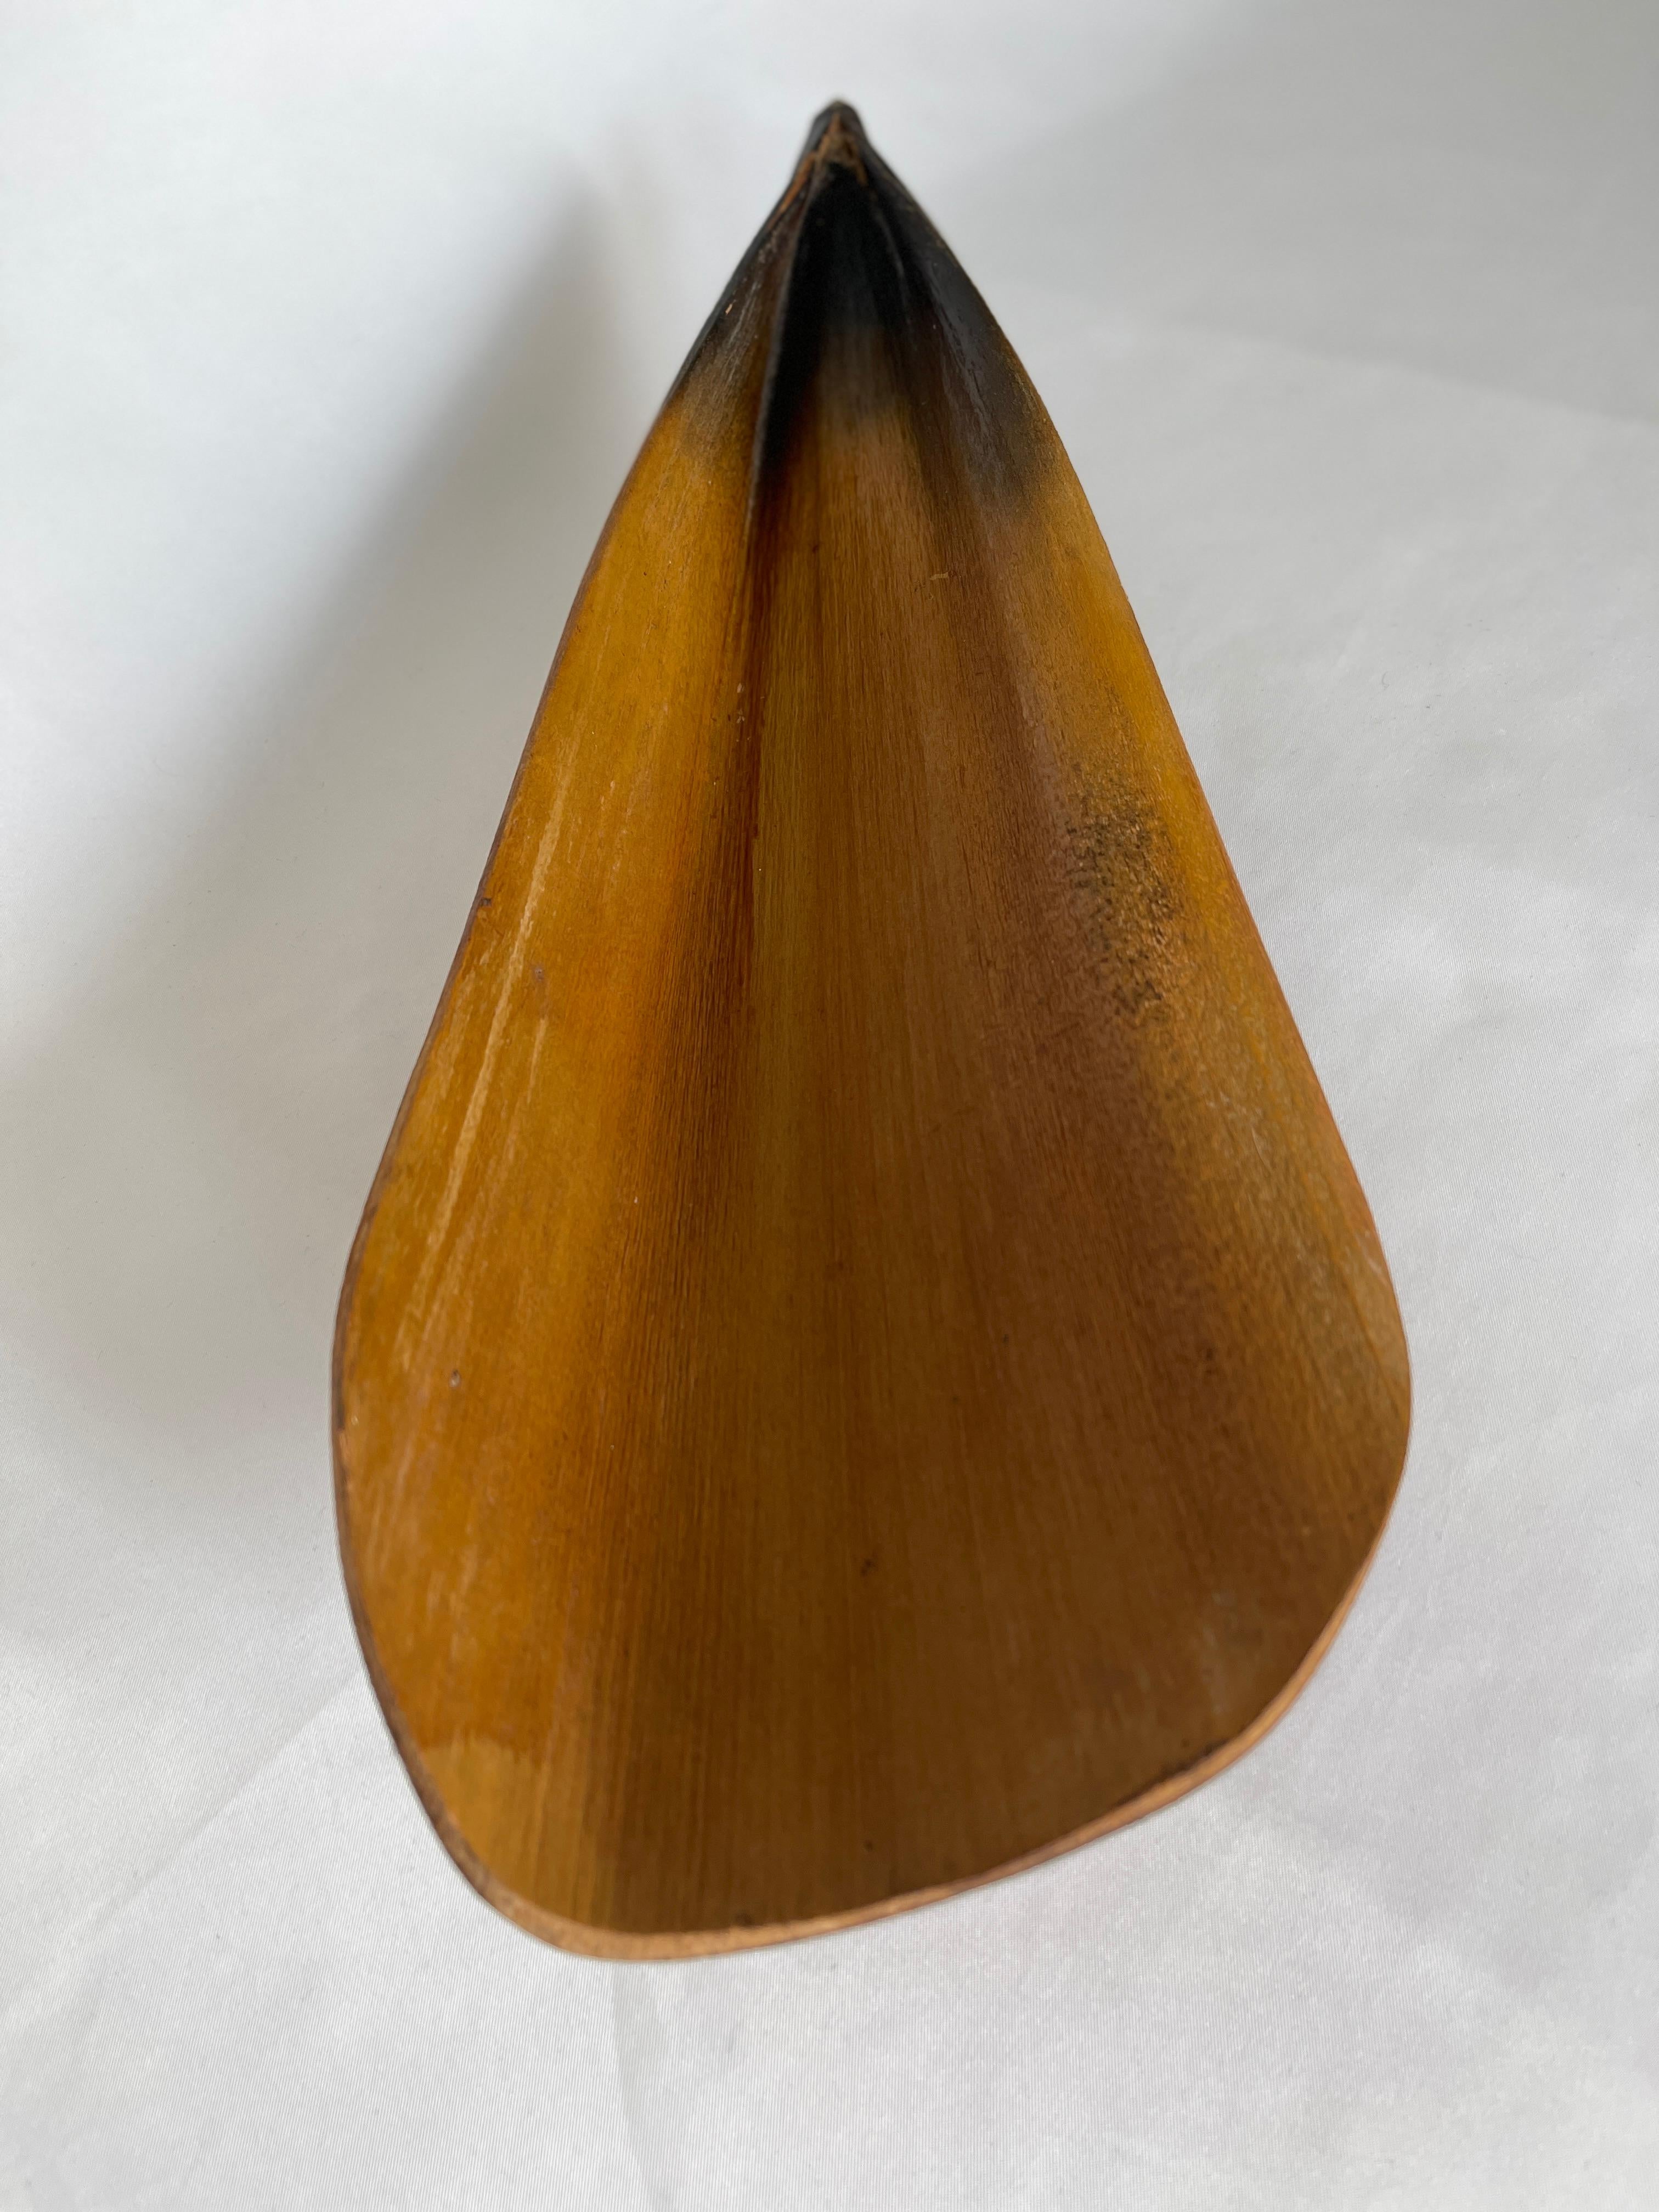 Natural Florida long palm leaf centrepiece tray with two balancing round wood ball legs Tray was crafted by drying and molding the leaf to the curved shape, perfect for display on a table or shelf.